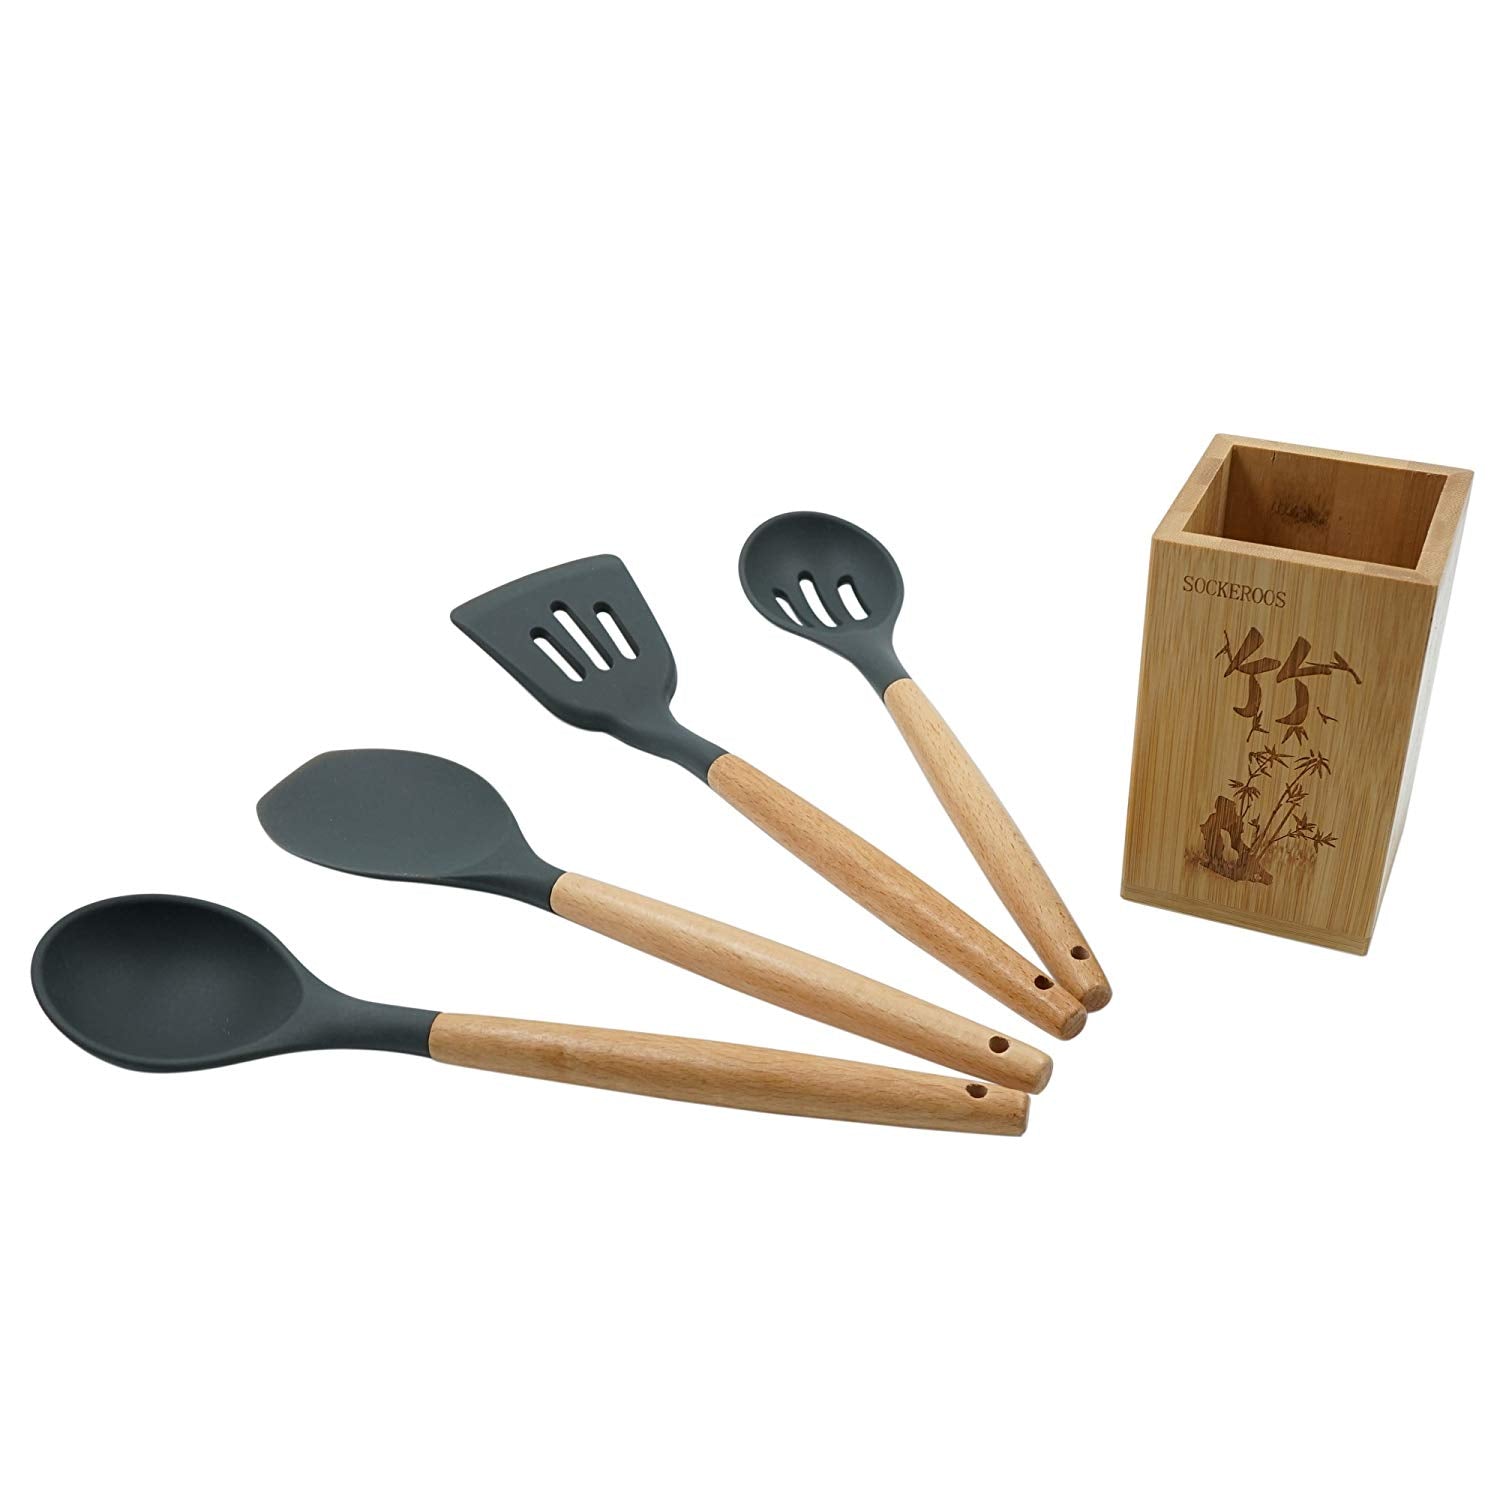 Silicone Kitchen Utensil 5 Pcs Cooking Tools Set with Beech Wood Handle, Bamboo Utensils Holder Included